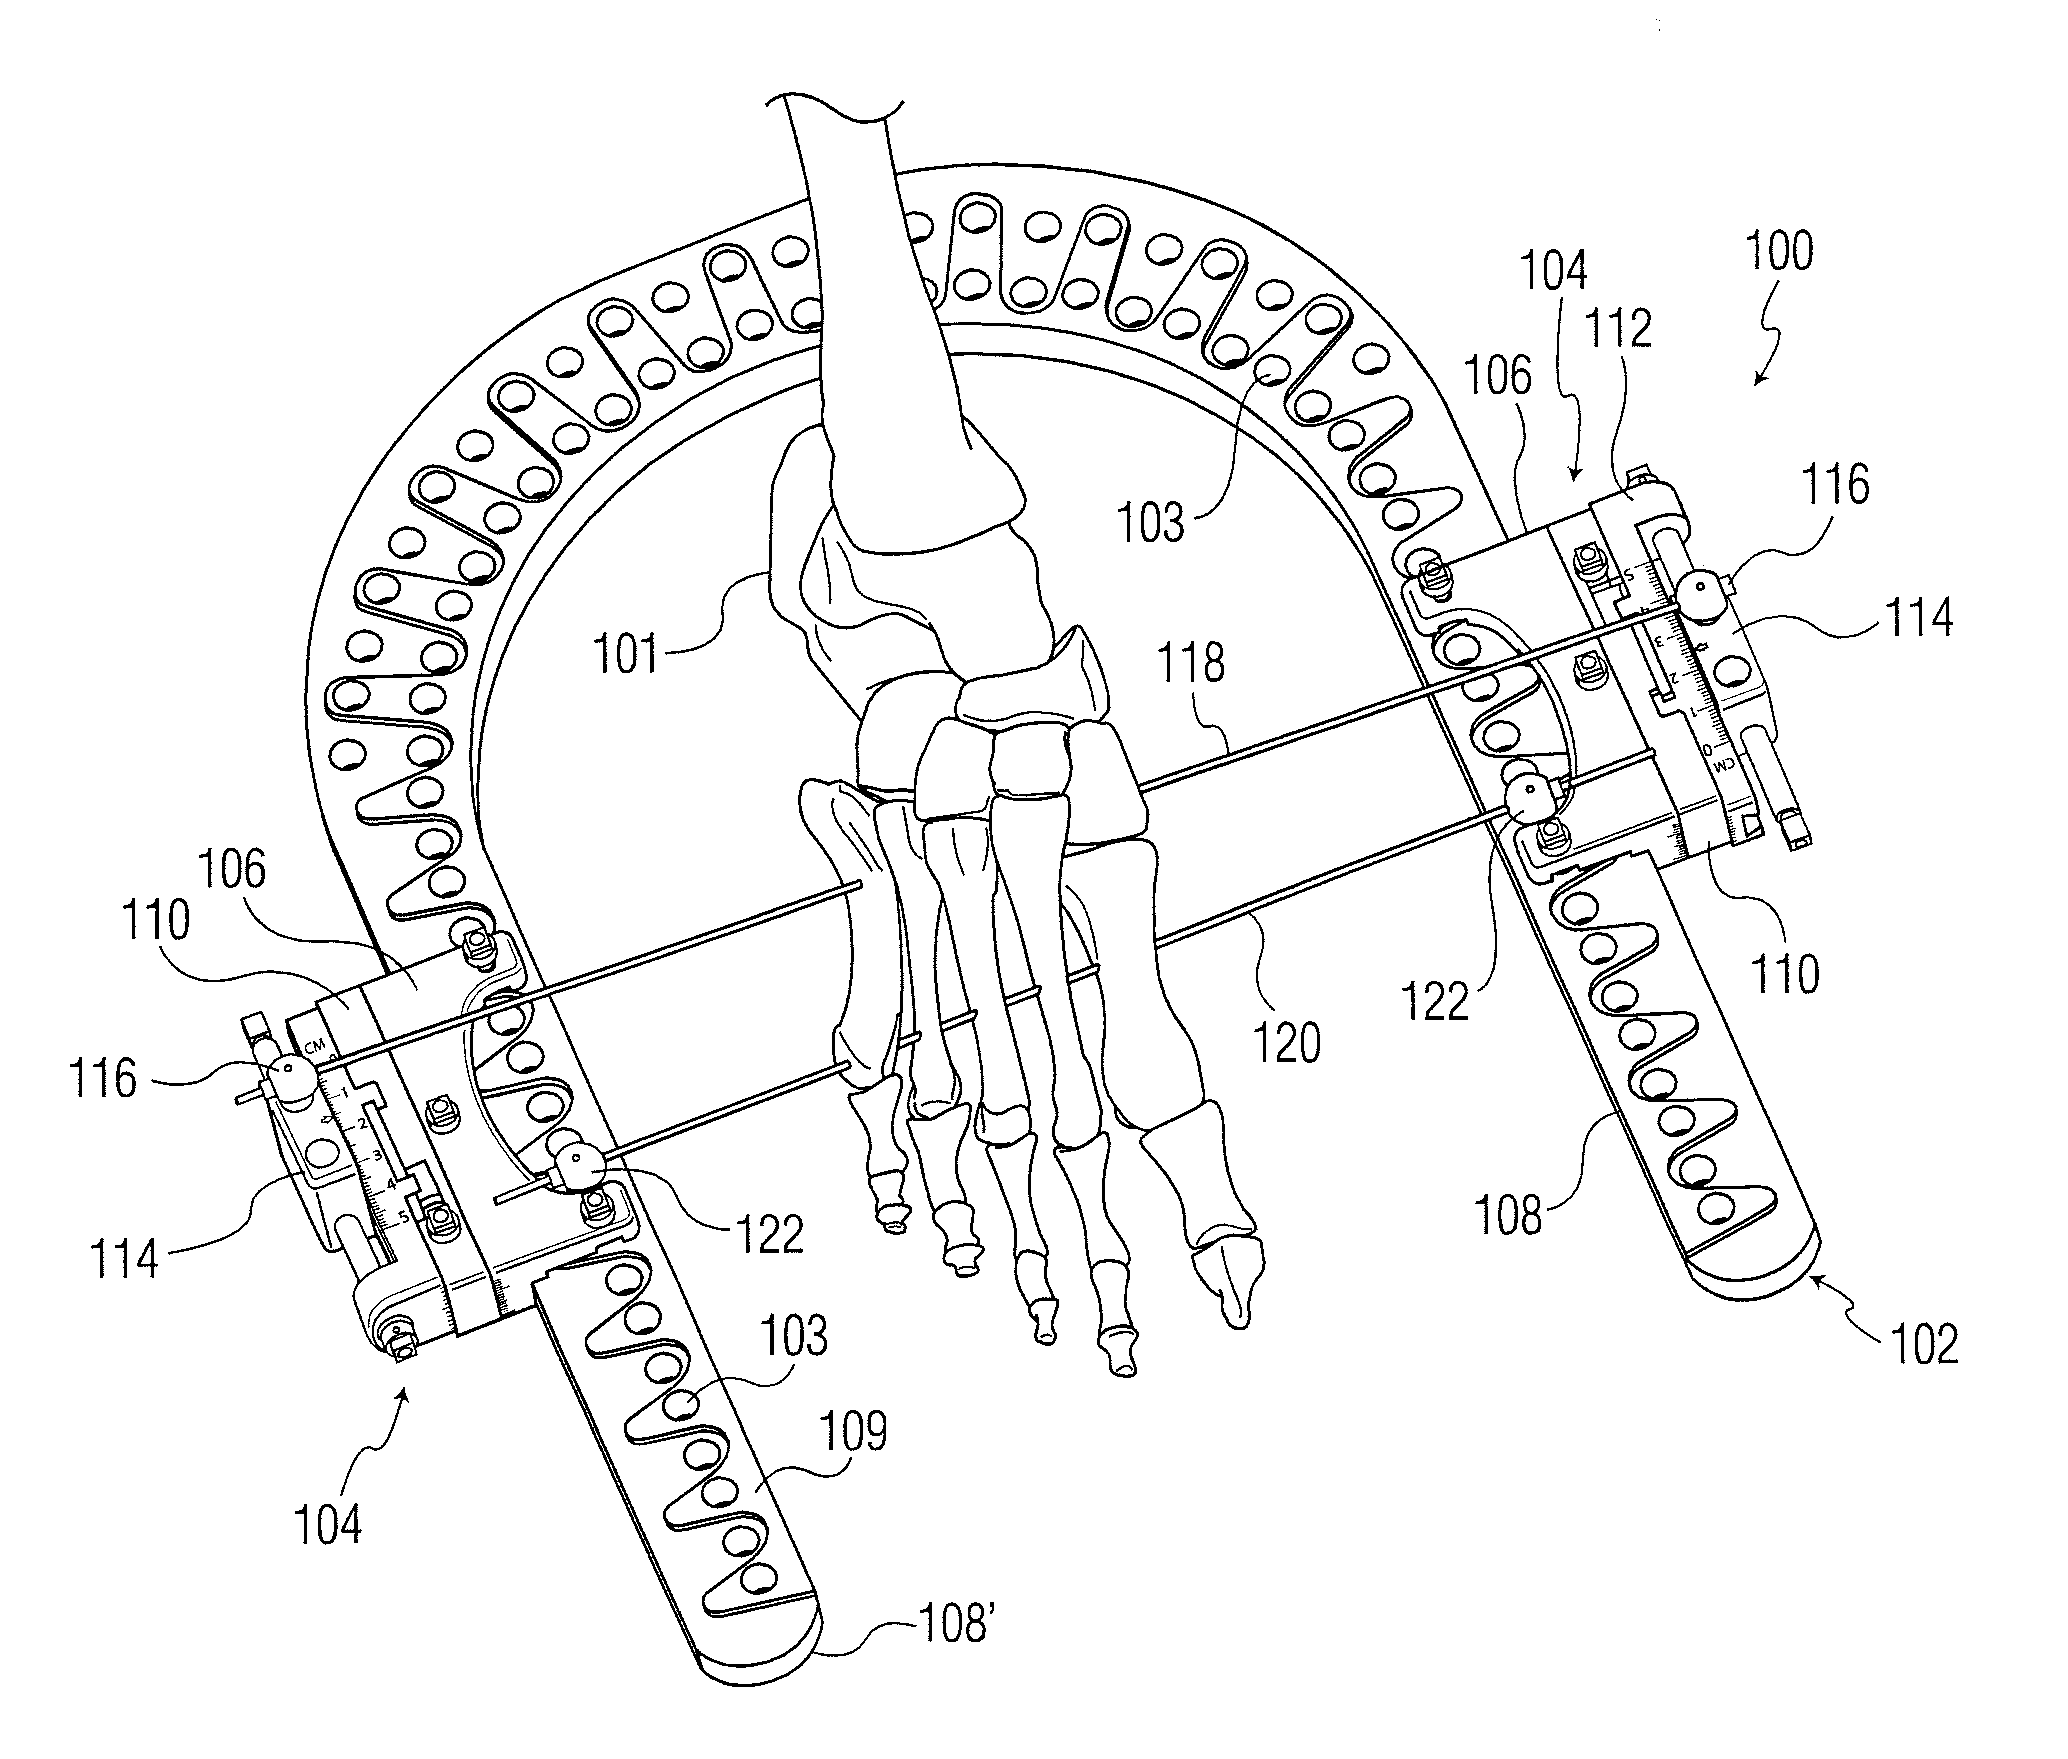 Dynamic external fixator and methods for use